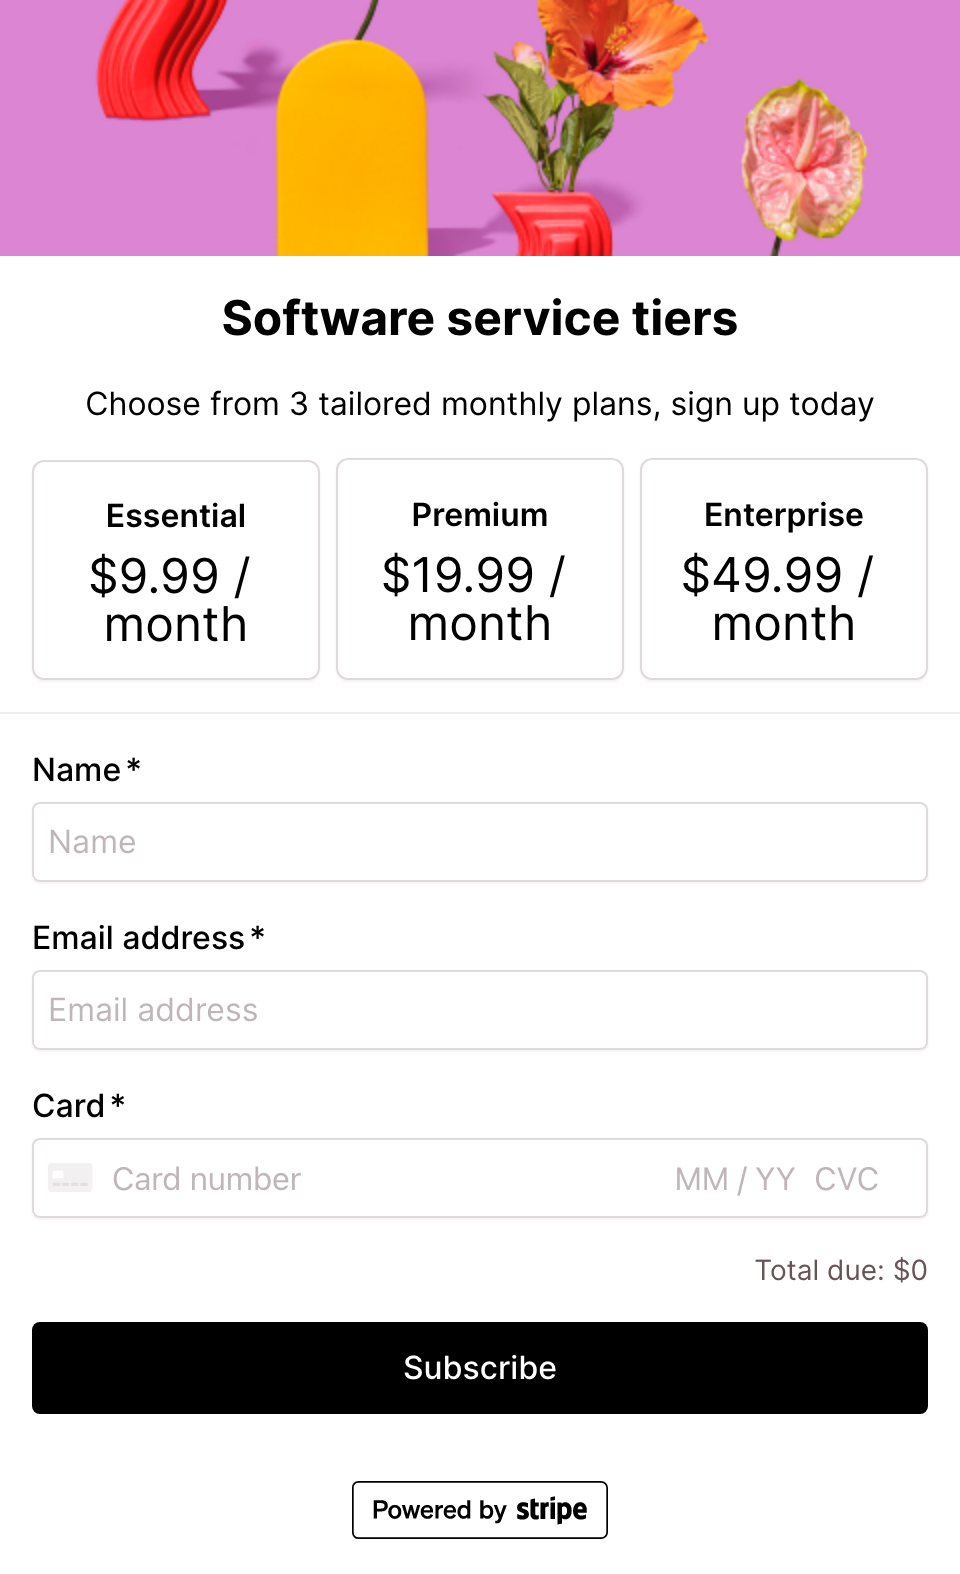 Software service - tiered pricing model - Stripe subscription